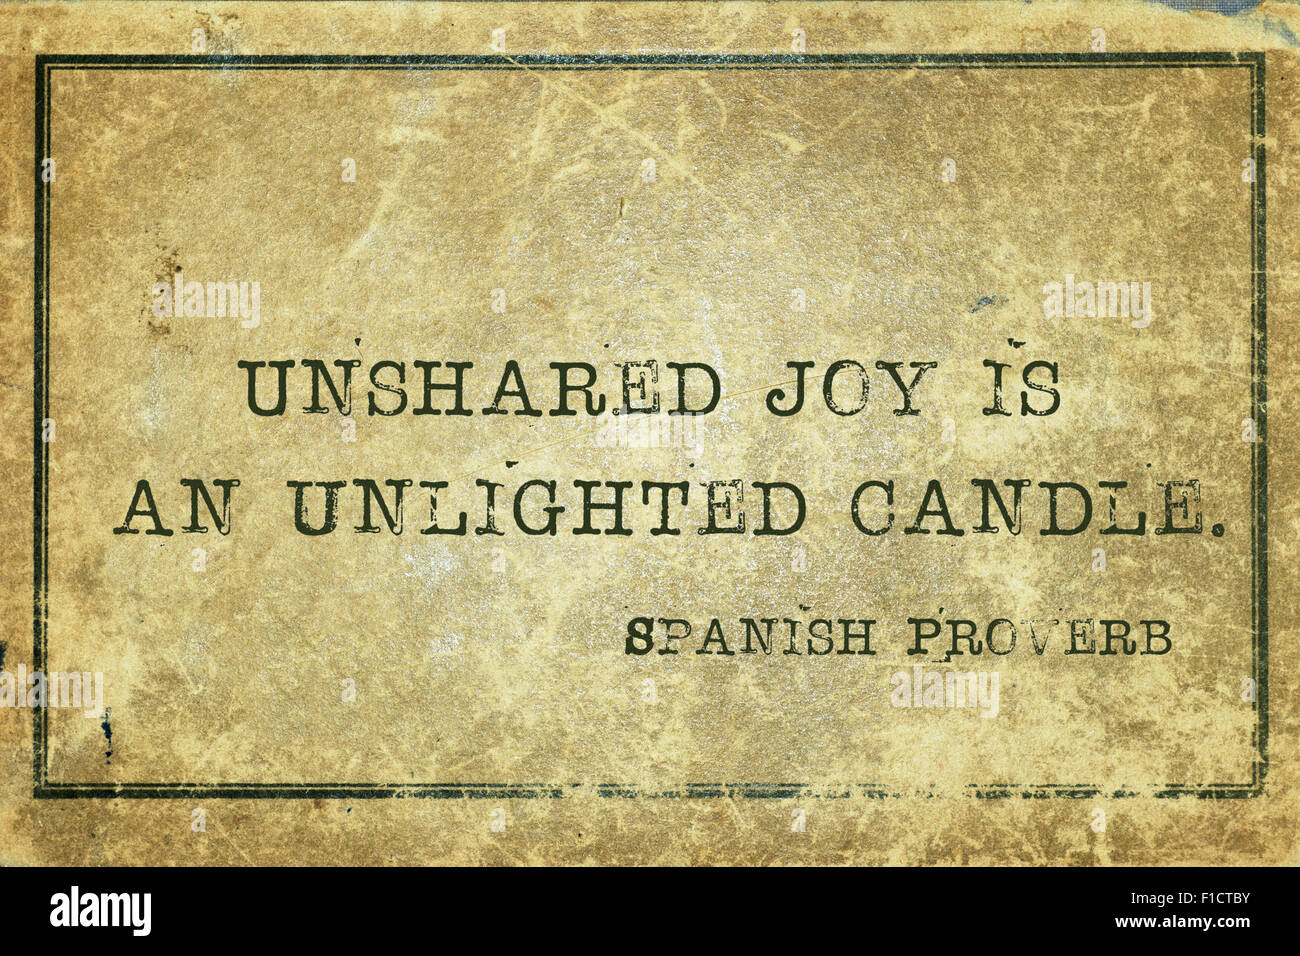 Unshared joy is an unlighted candle - ancient Spanish proverb printed on grunge vintage cardboard Stock Photo